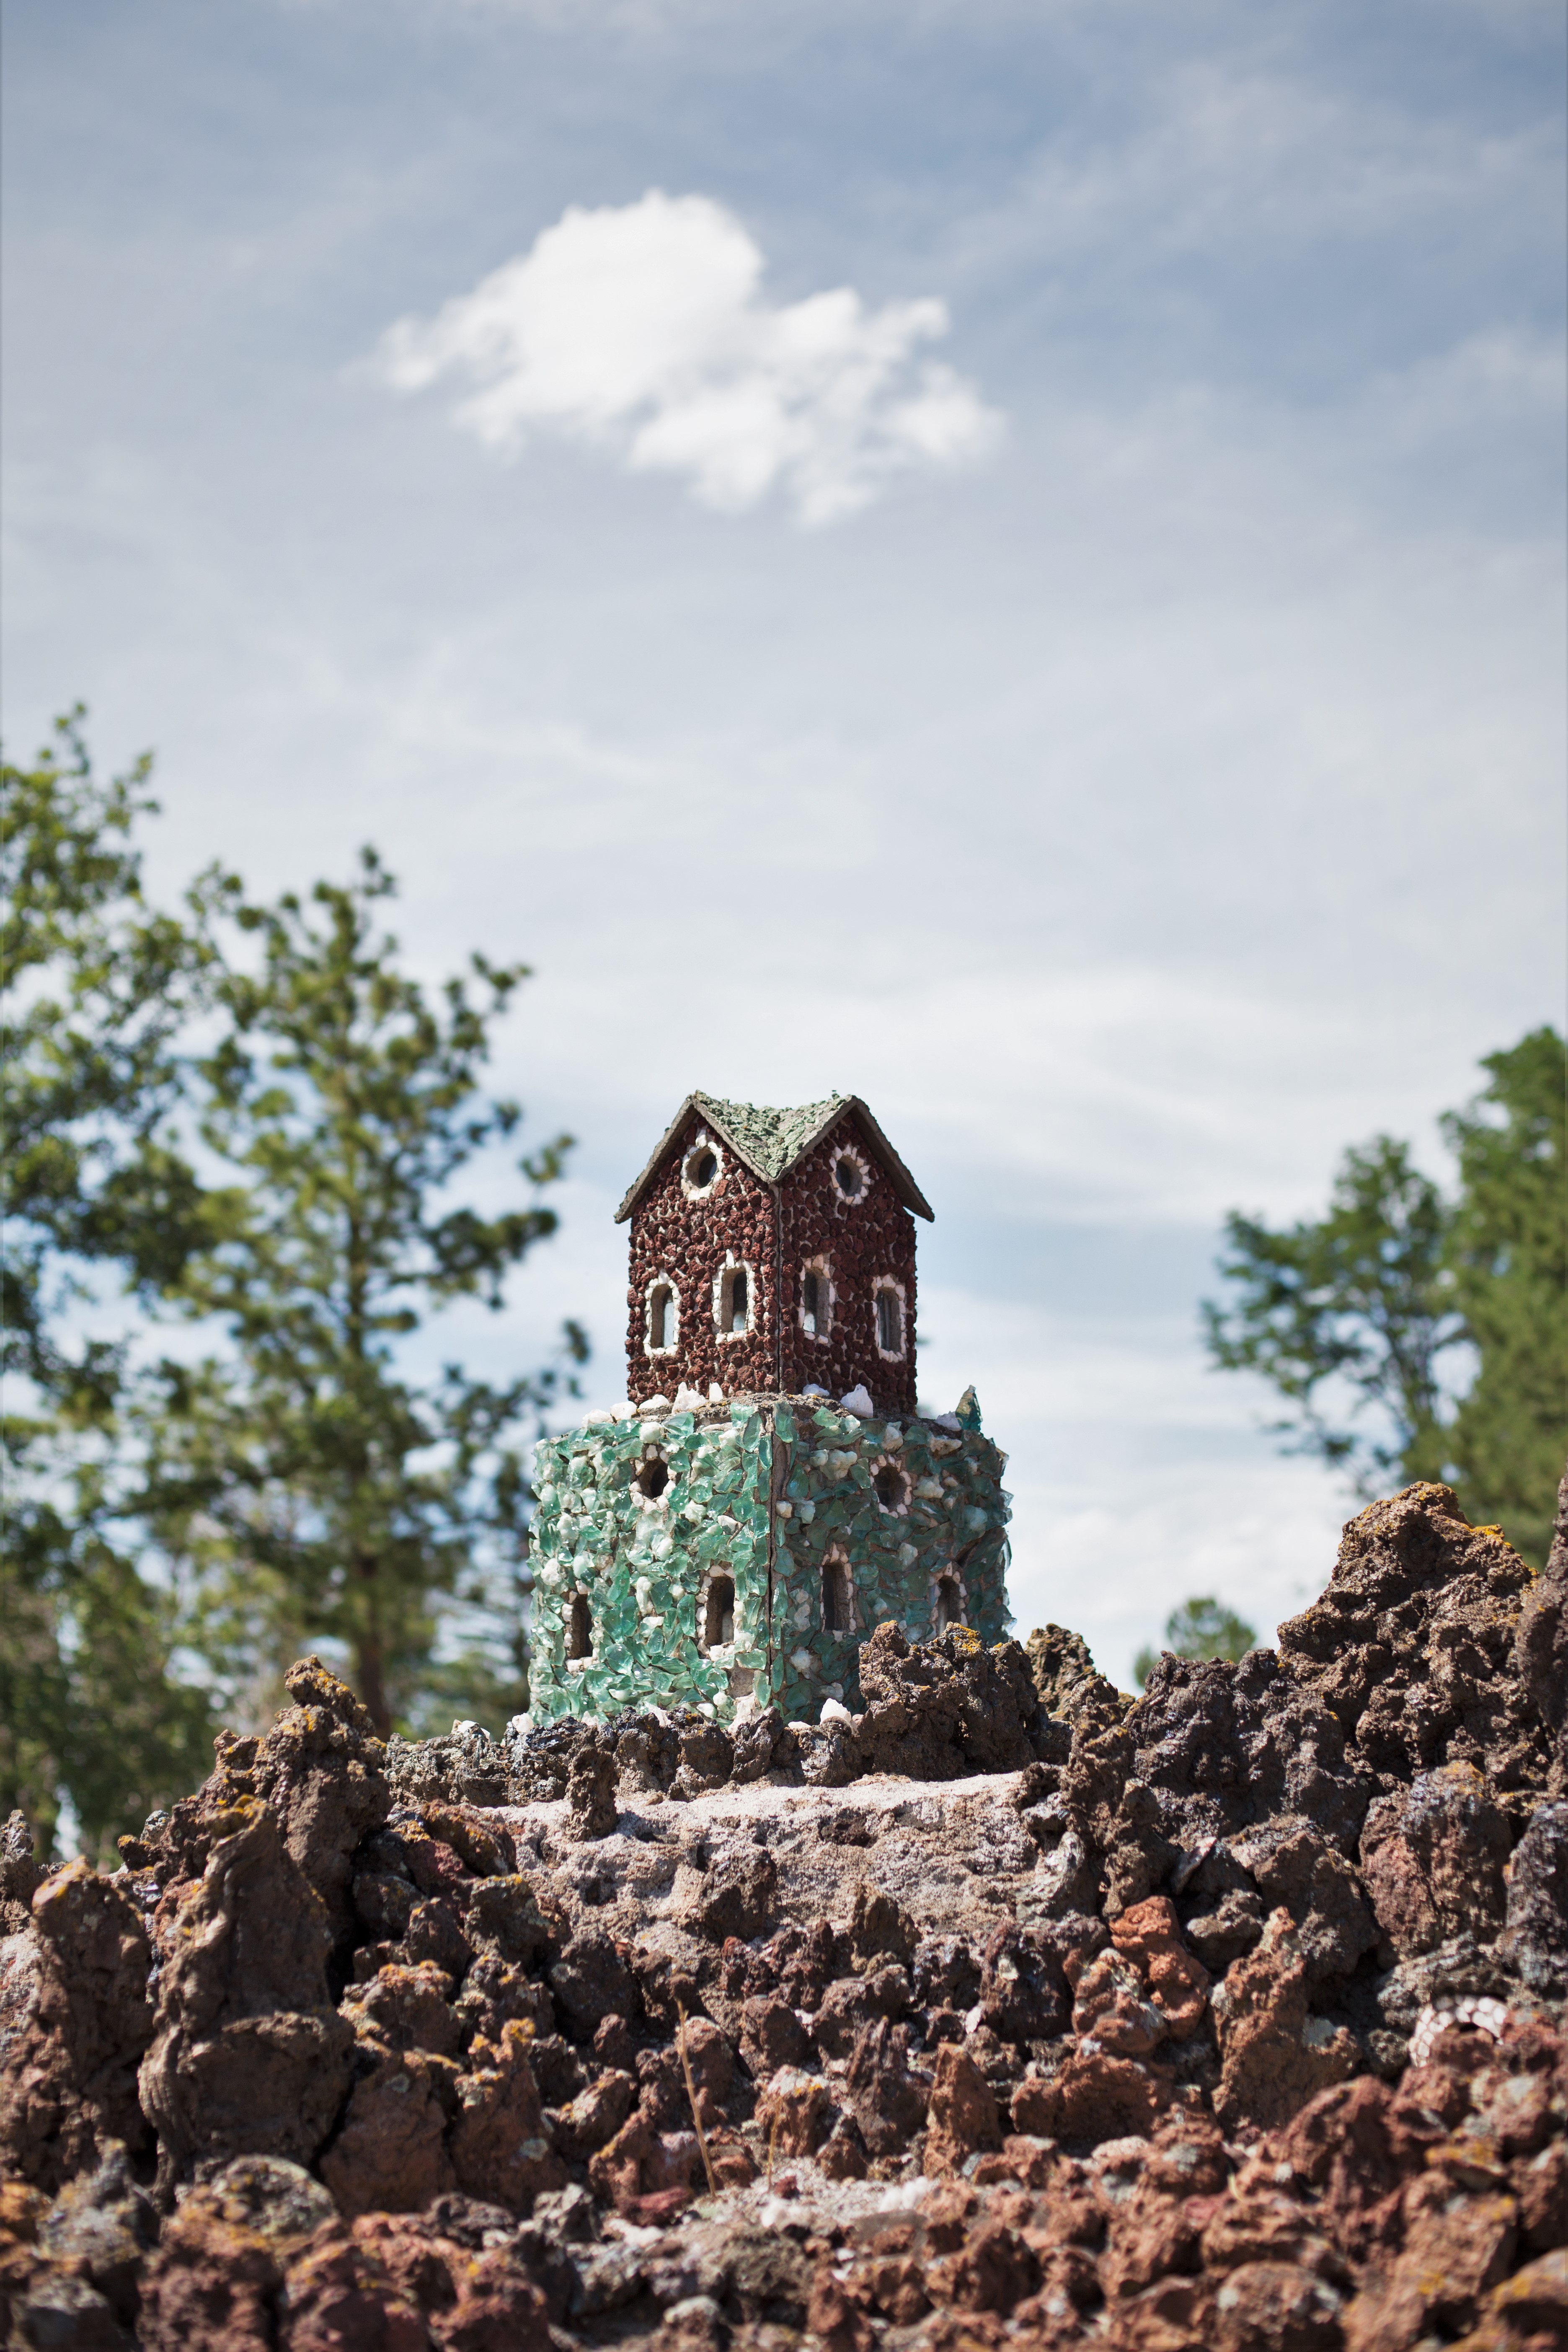 A tiny handmade house on clumps of dirt against a blue, cloudy sky. Represents "The Memory House," a childhood home